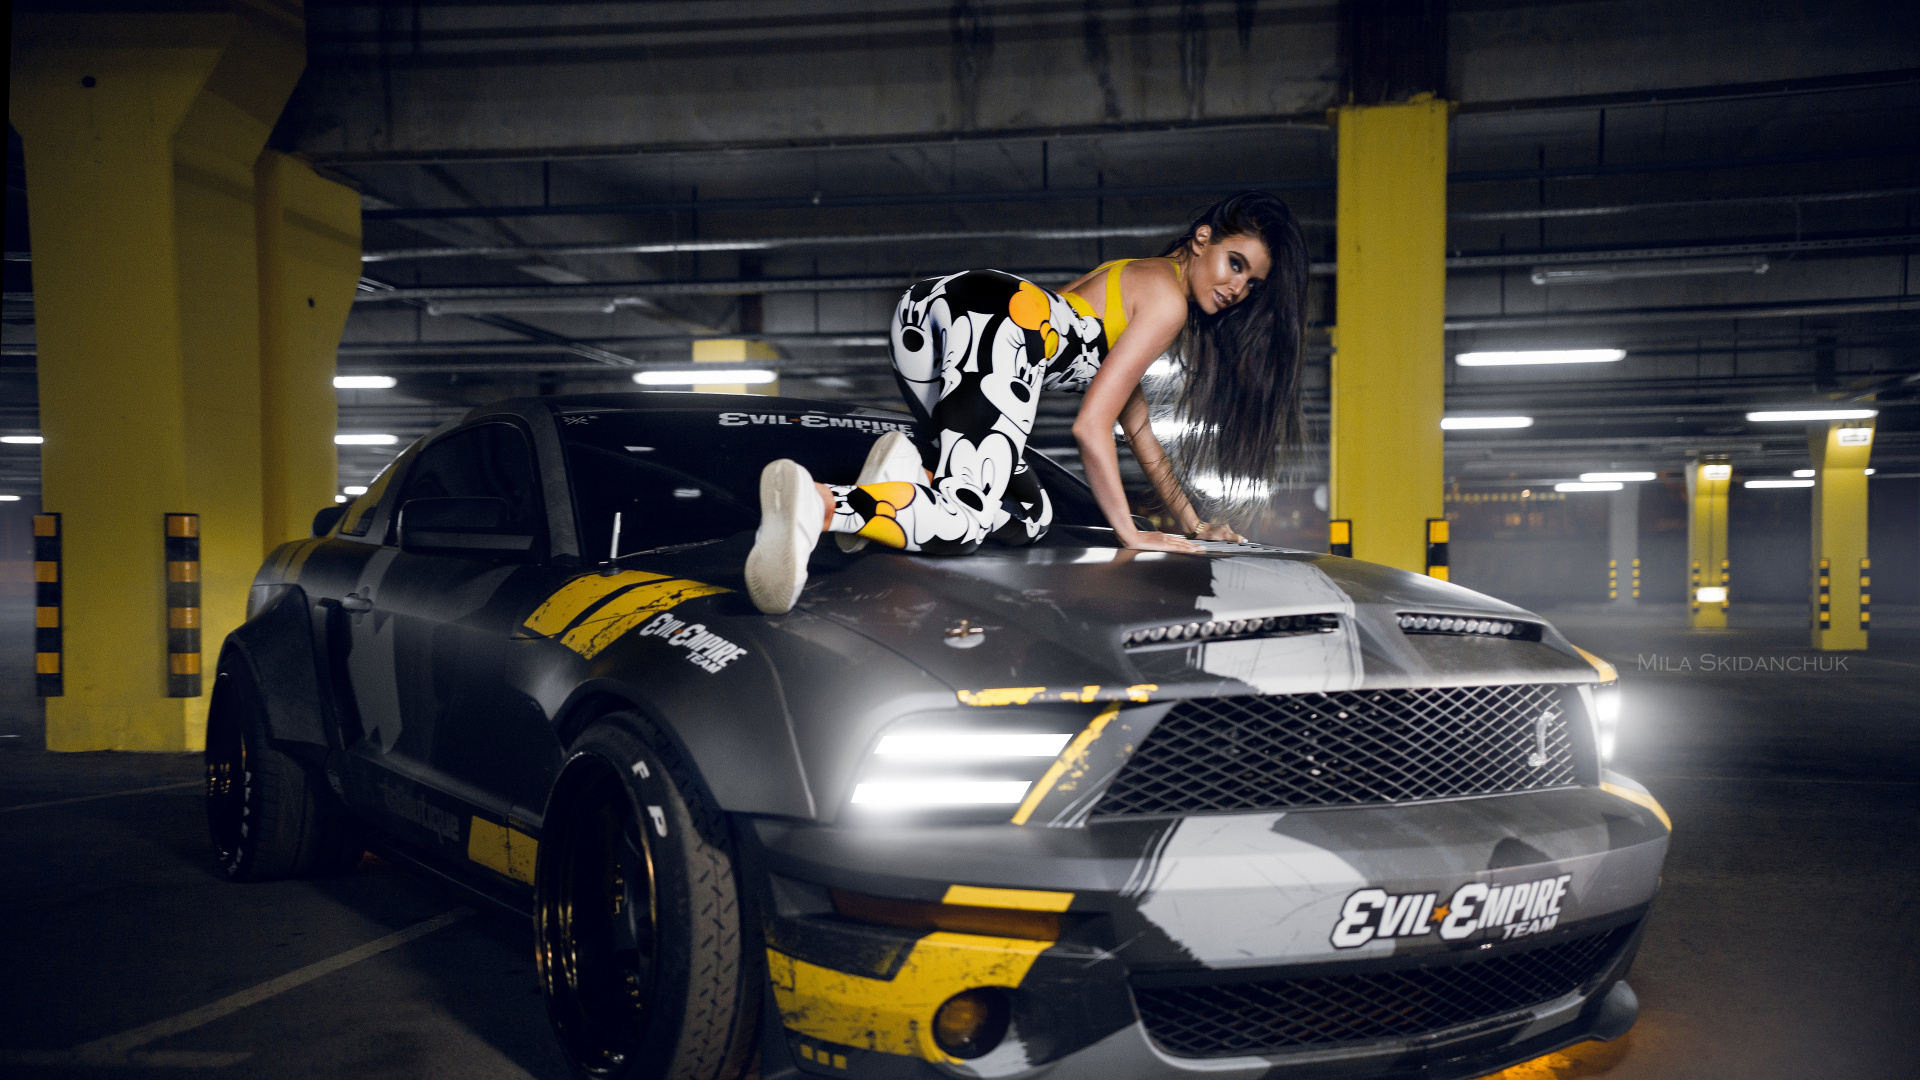 Woman in Black and White Floral Dress Riding on Black and Yellow Sports Car. Wallpaper in 1920x1080 Resolution